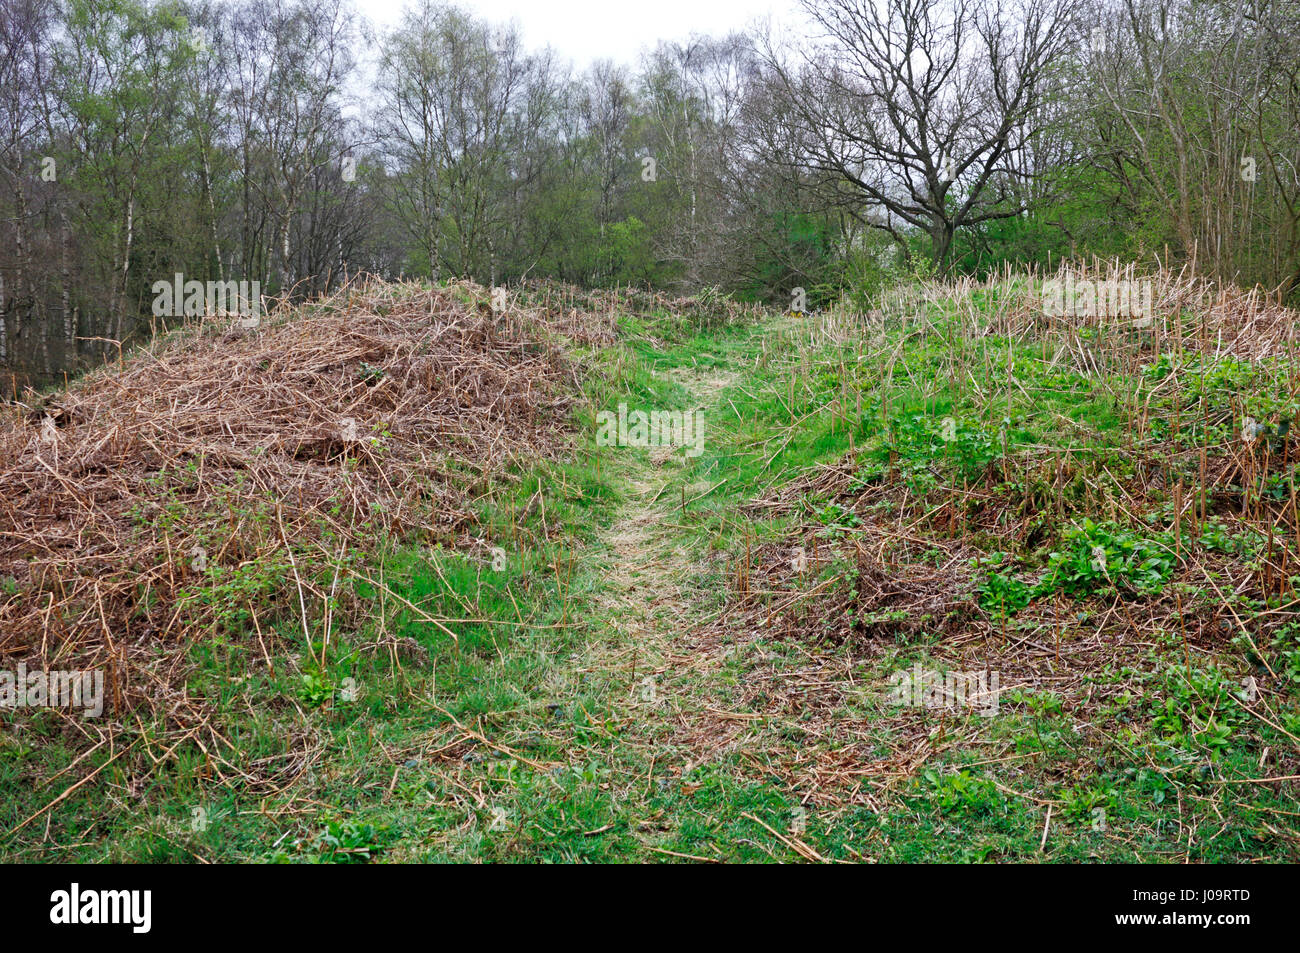 A view of a tumulus or bowl barrow at Alderford Common, Norfolk, England, United Kingdom. Stock Photo